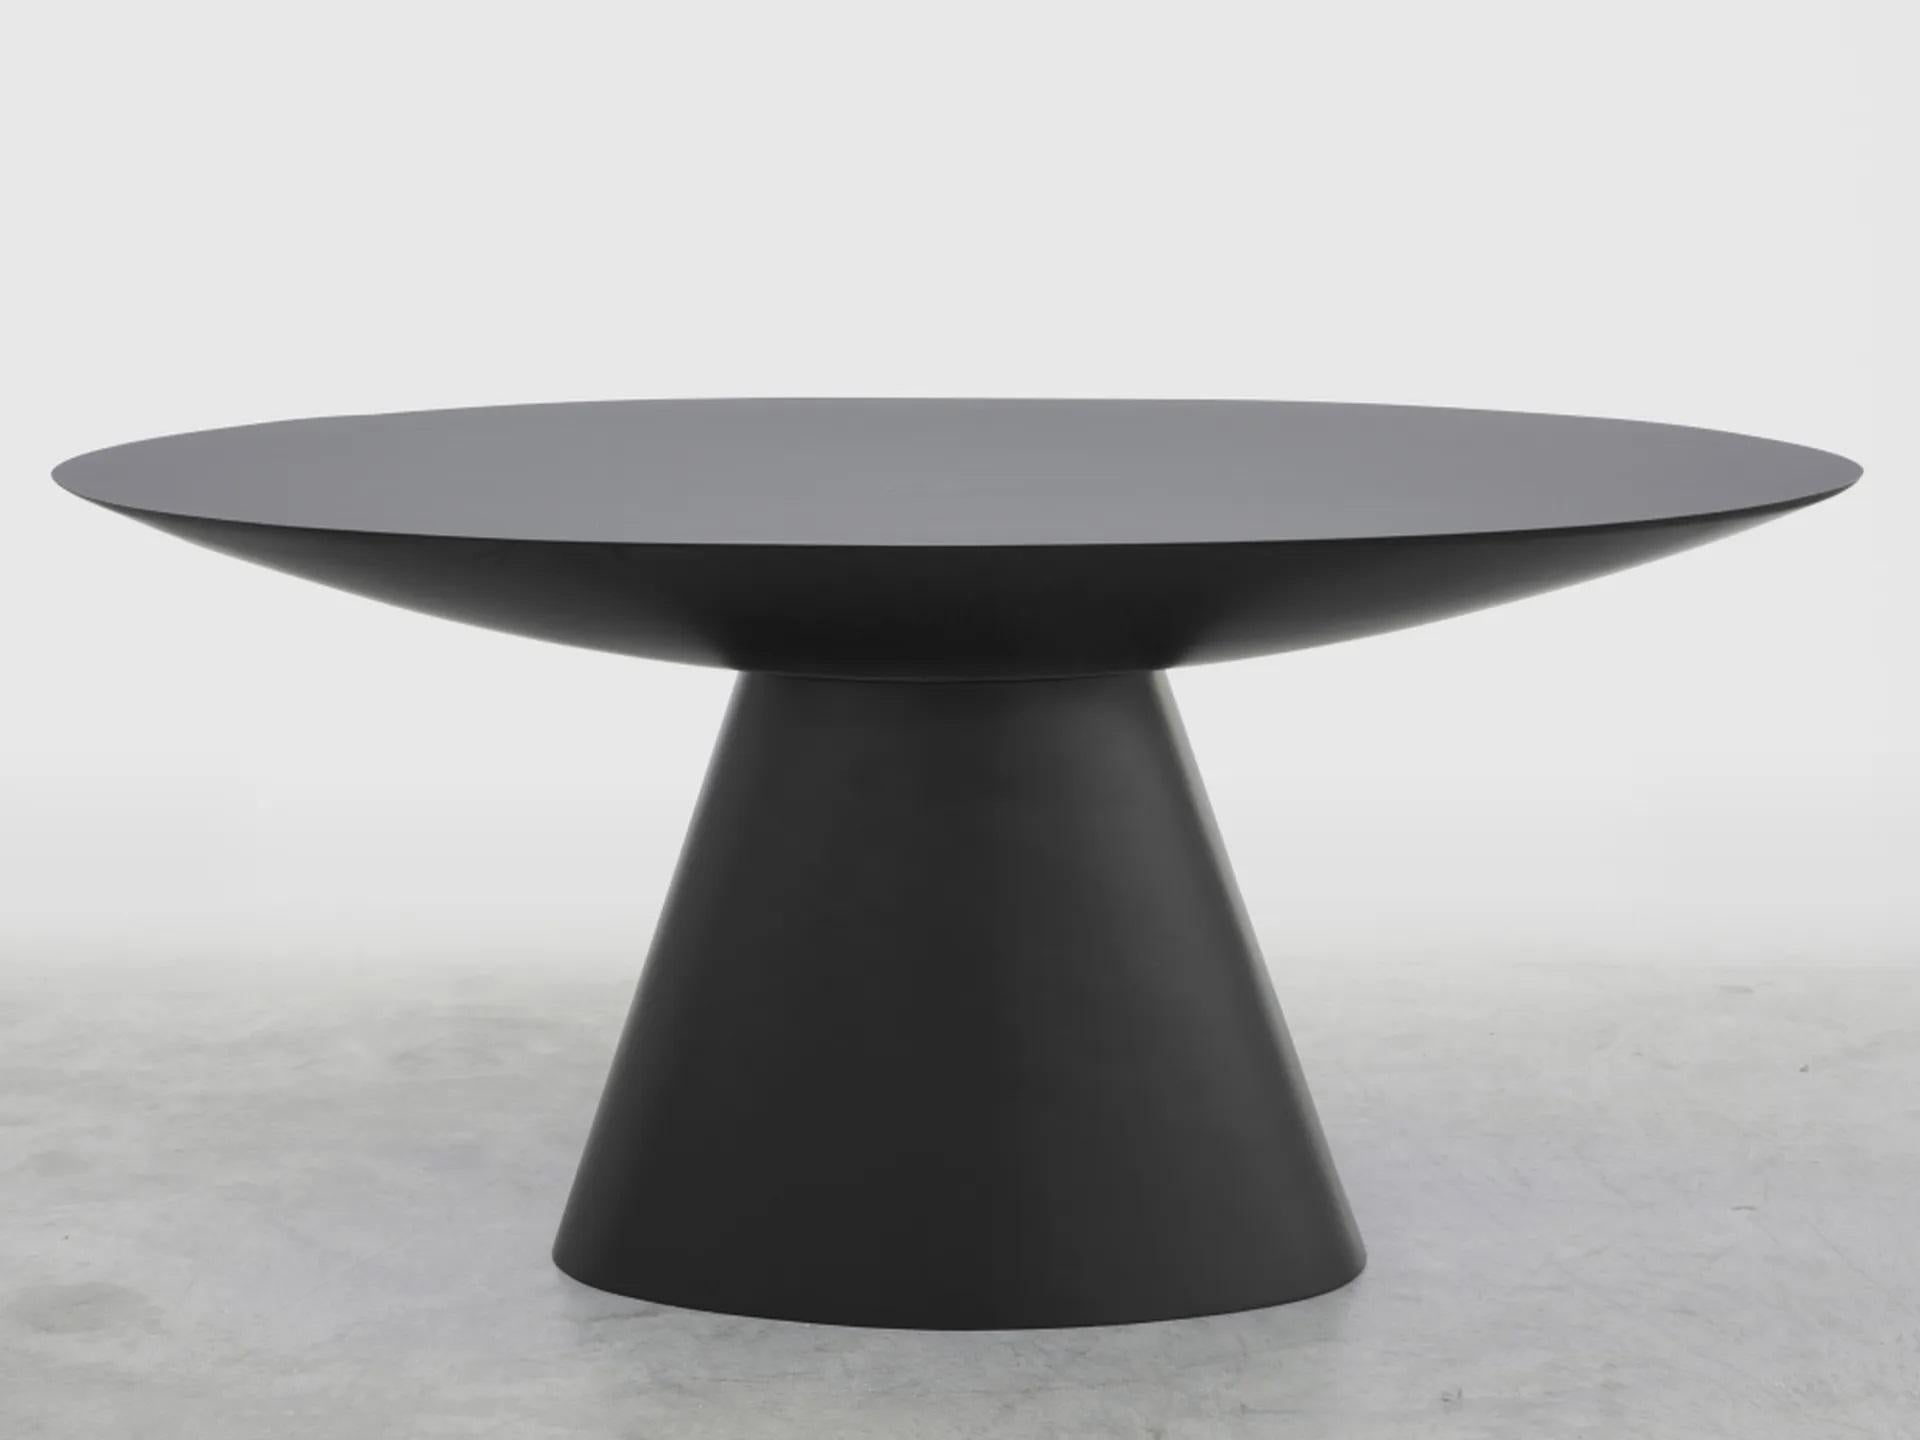 Slab coffee table by Imperfettolab
2020
Dimensions: 179 x 99 x H 74
Materials: Fibreglass
Available in black and white.

Pure geometry for this table that reveals an oval-shaped top. A spacious ellipse raised from a central base, for a